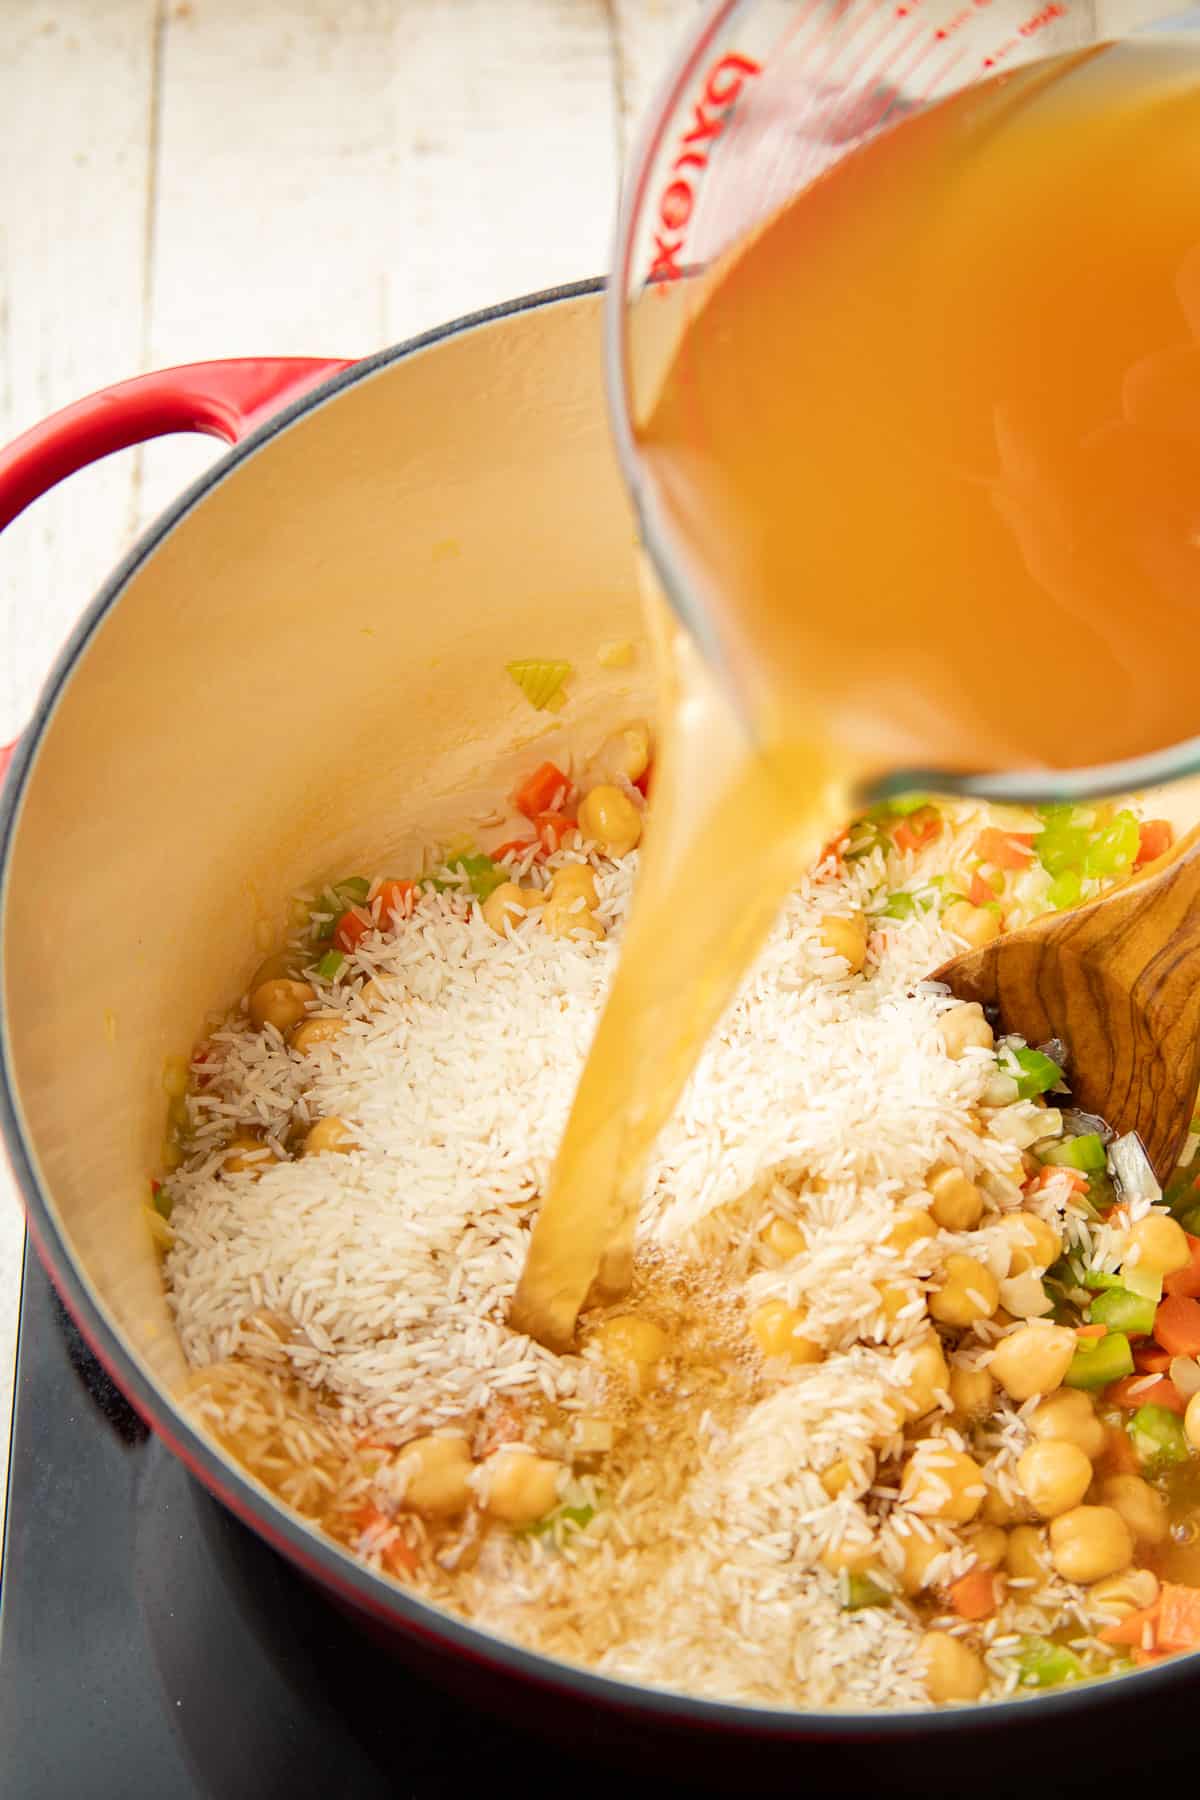 Broth being poured into a pot of chickpeas, rice and vegetables.